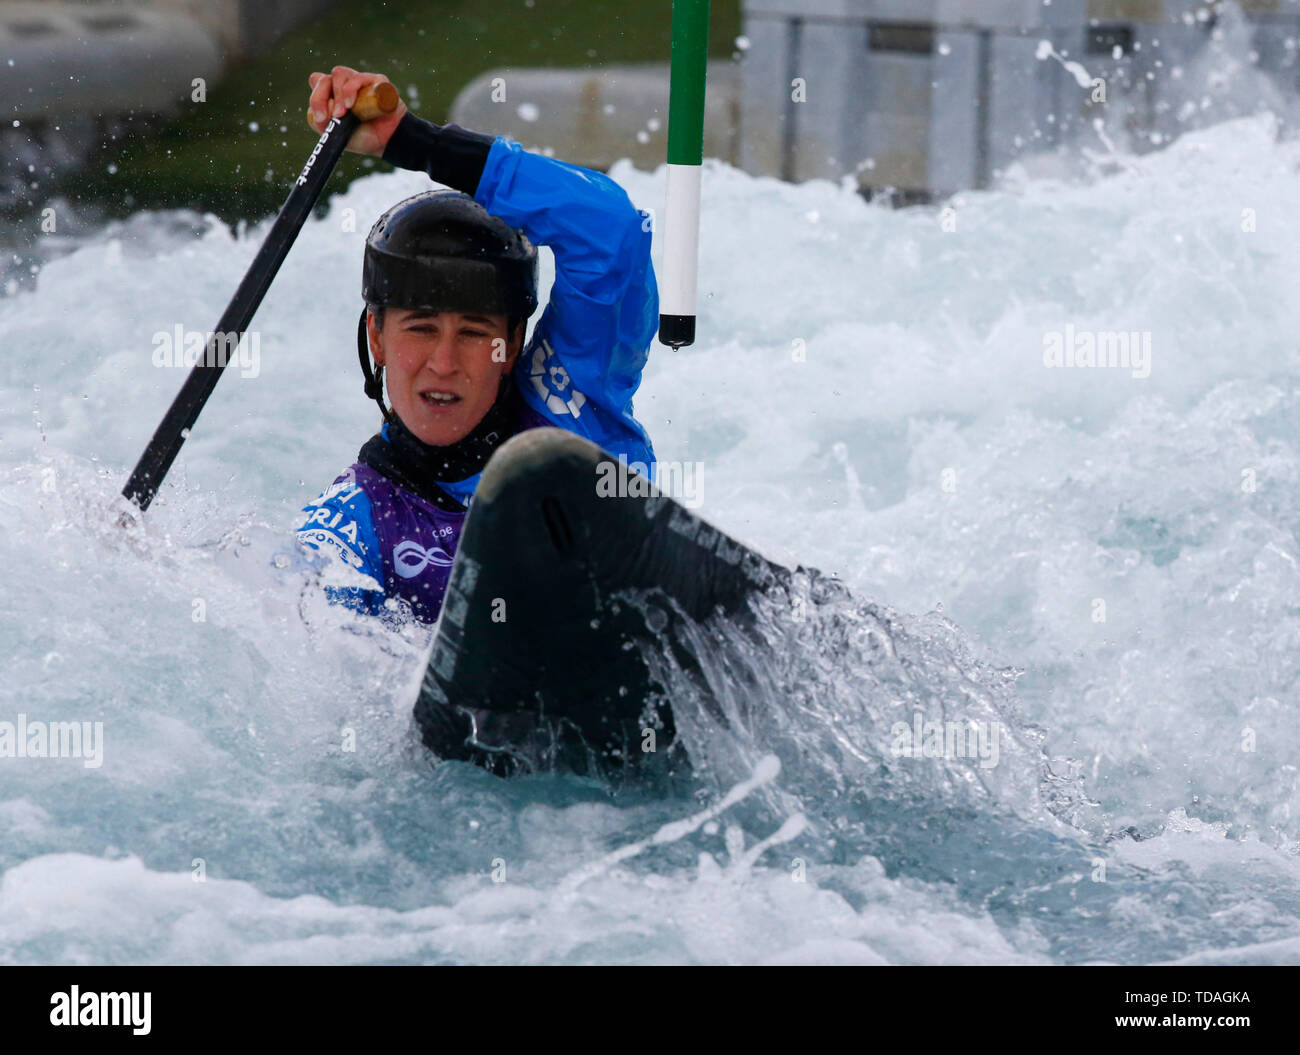 London, UK. 01st Feb, 2018. LONDON, ENGLAND JUNE 14 Nuria Vilarrubla (ESP) Compete in Women's C1 1st Heat Run during 2019 ICF Canoe Slalom World Cup 1 at the Lee Valley White Water Centre, London on 14 June 2019 Credit: Action Foto Sport/Alamy Live News Stock Photo